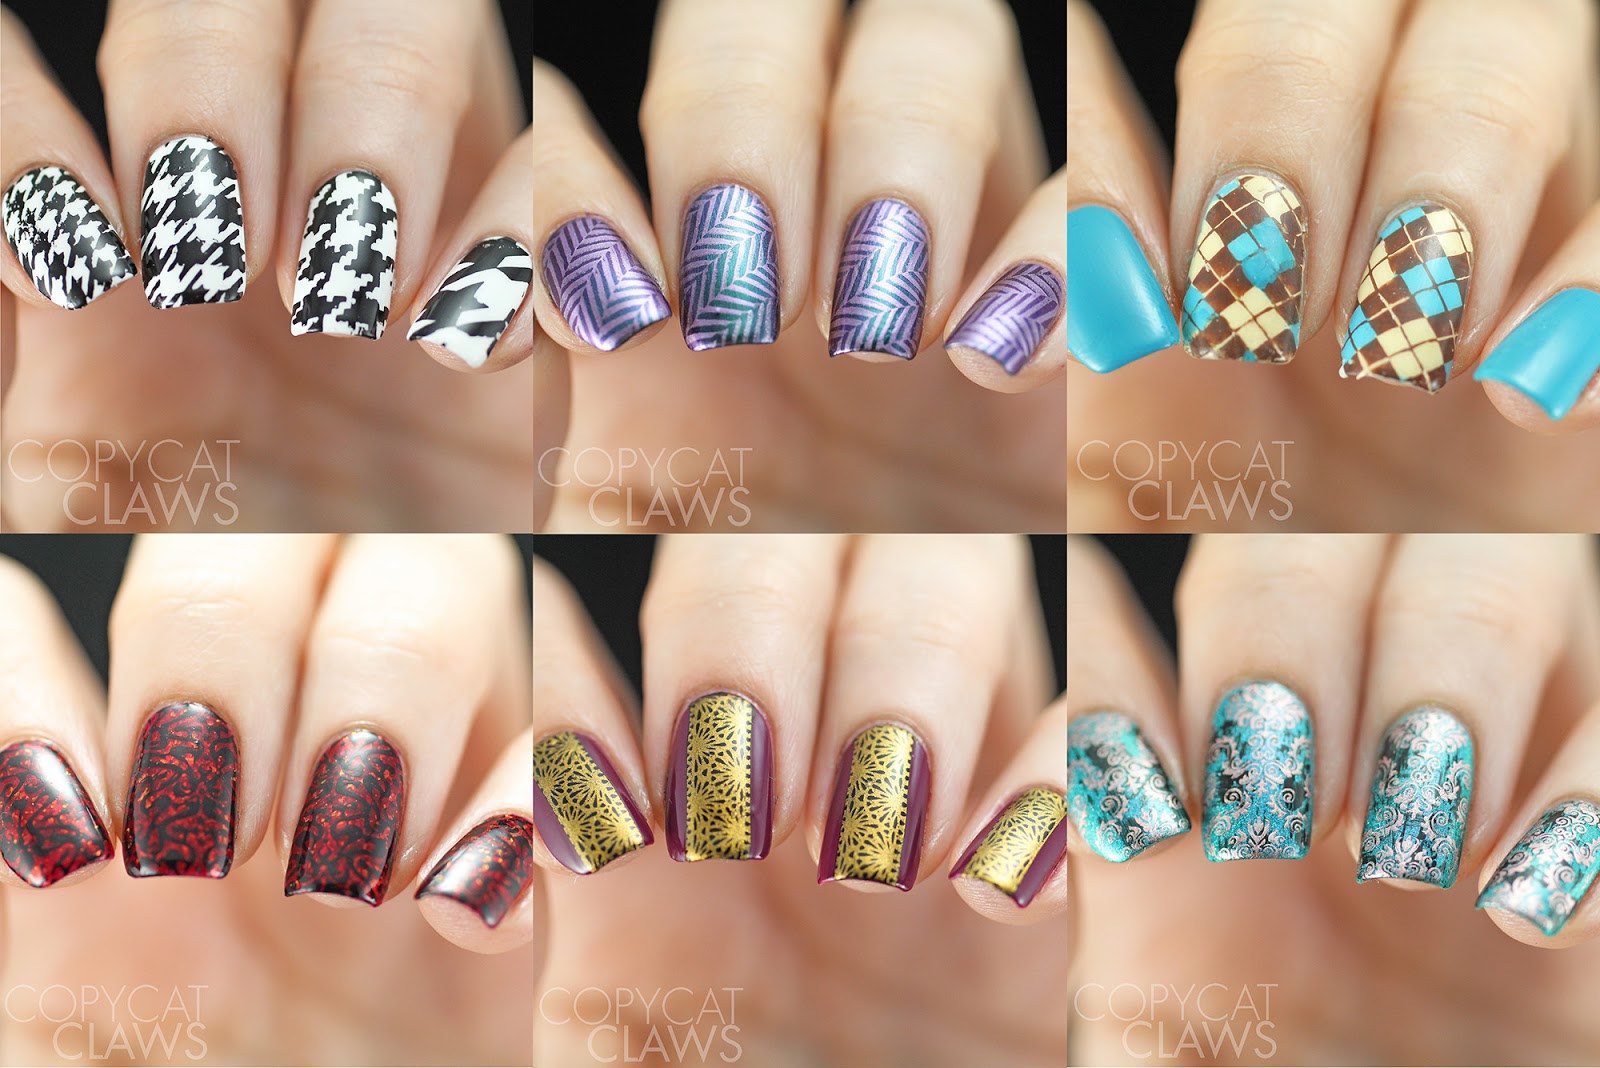 Girl Nail Art Images - wide 3